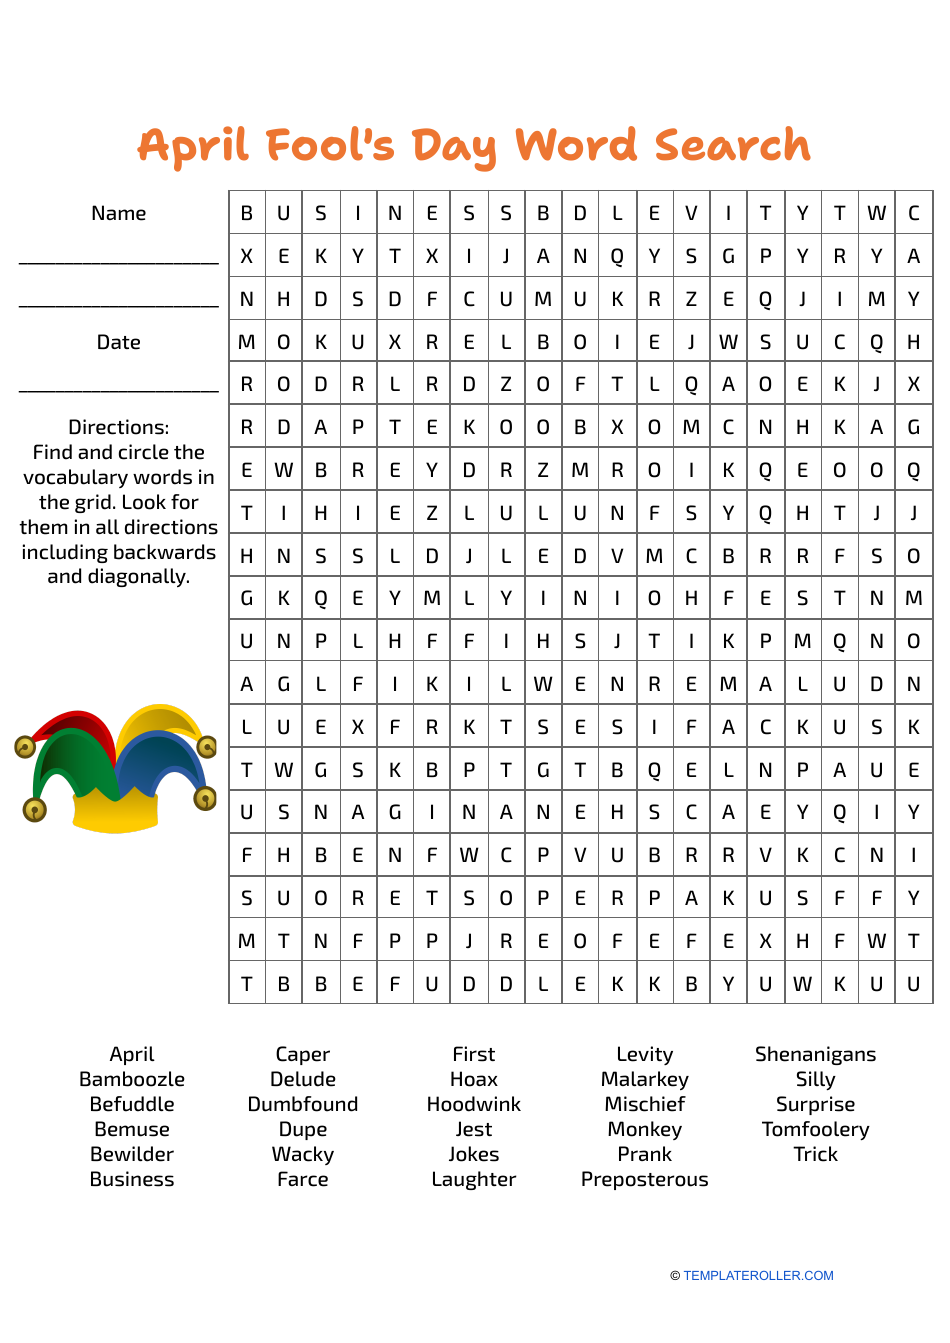 April Fool s Day Word Search With Answers Download Printable PDF